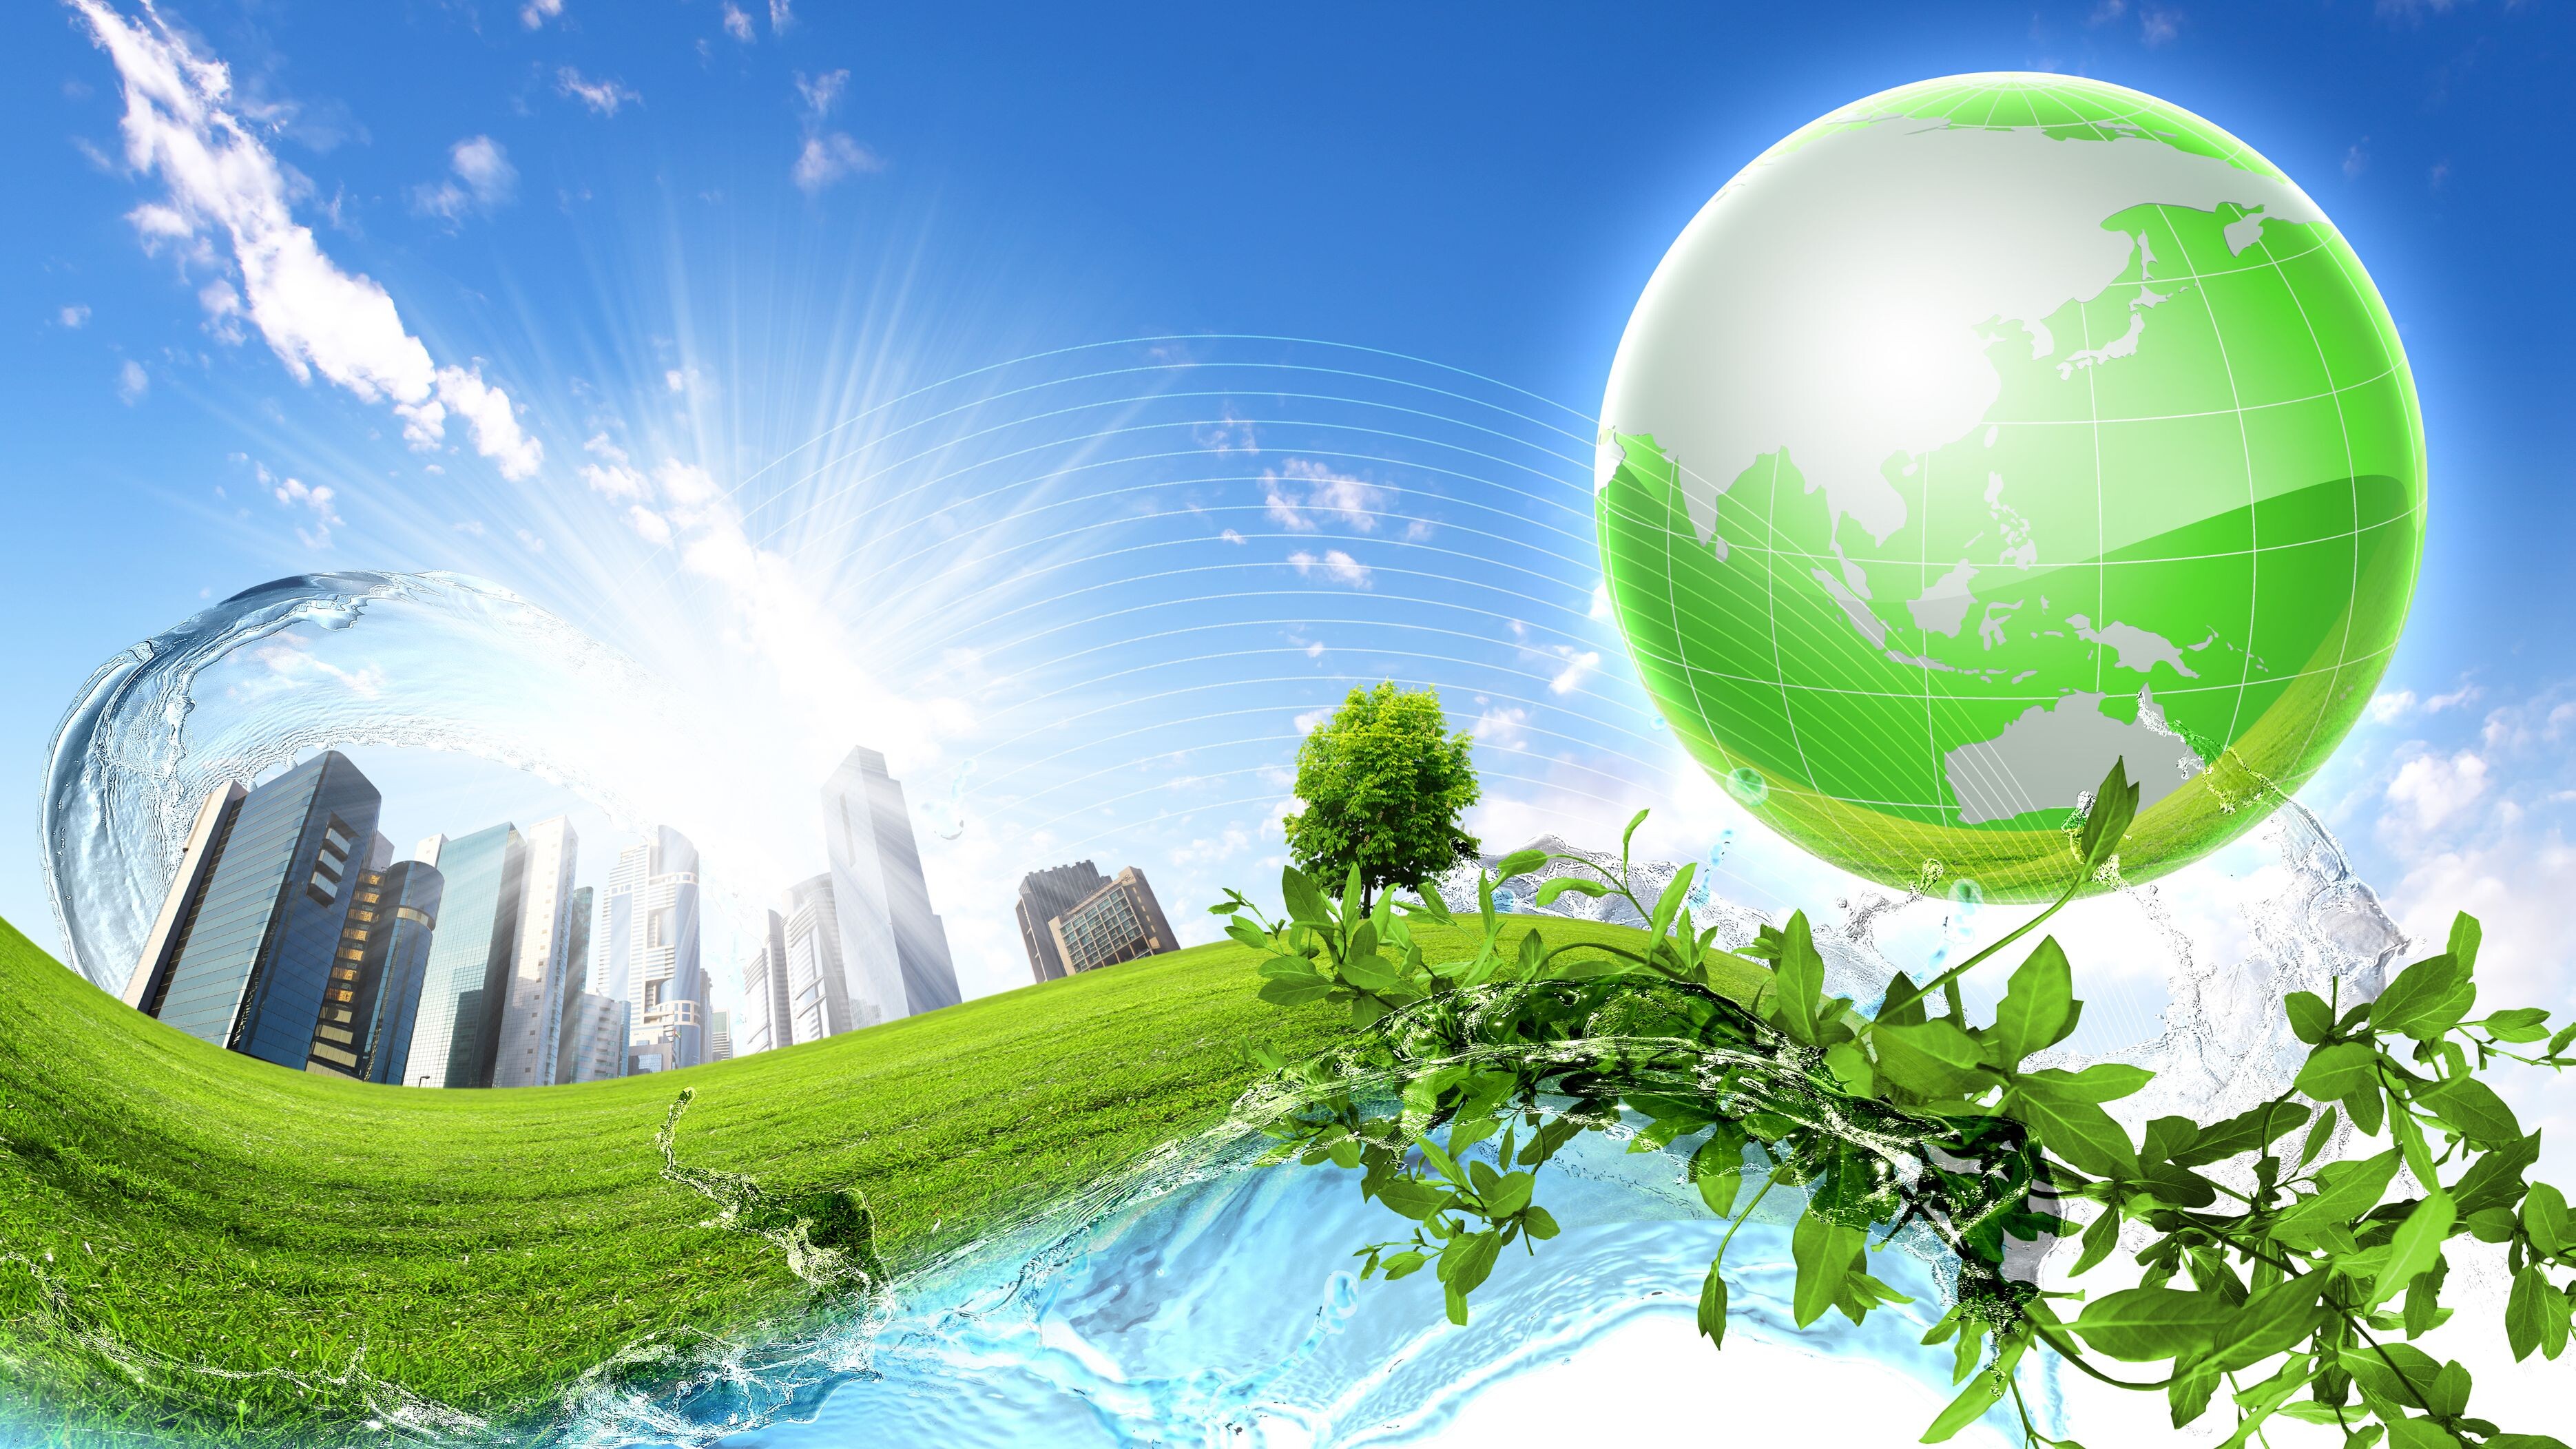 Go Green: Conserving the nature, Leading eco-friendly life, Environmentally responsible. 3740x2110 HD Wallpaper.